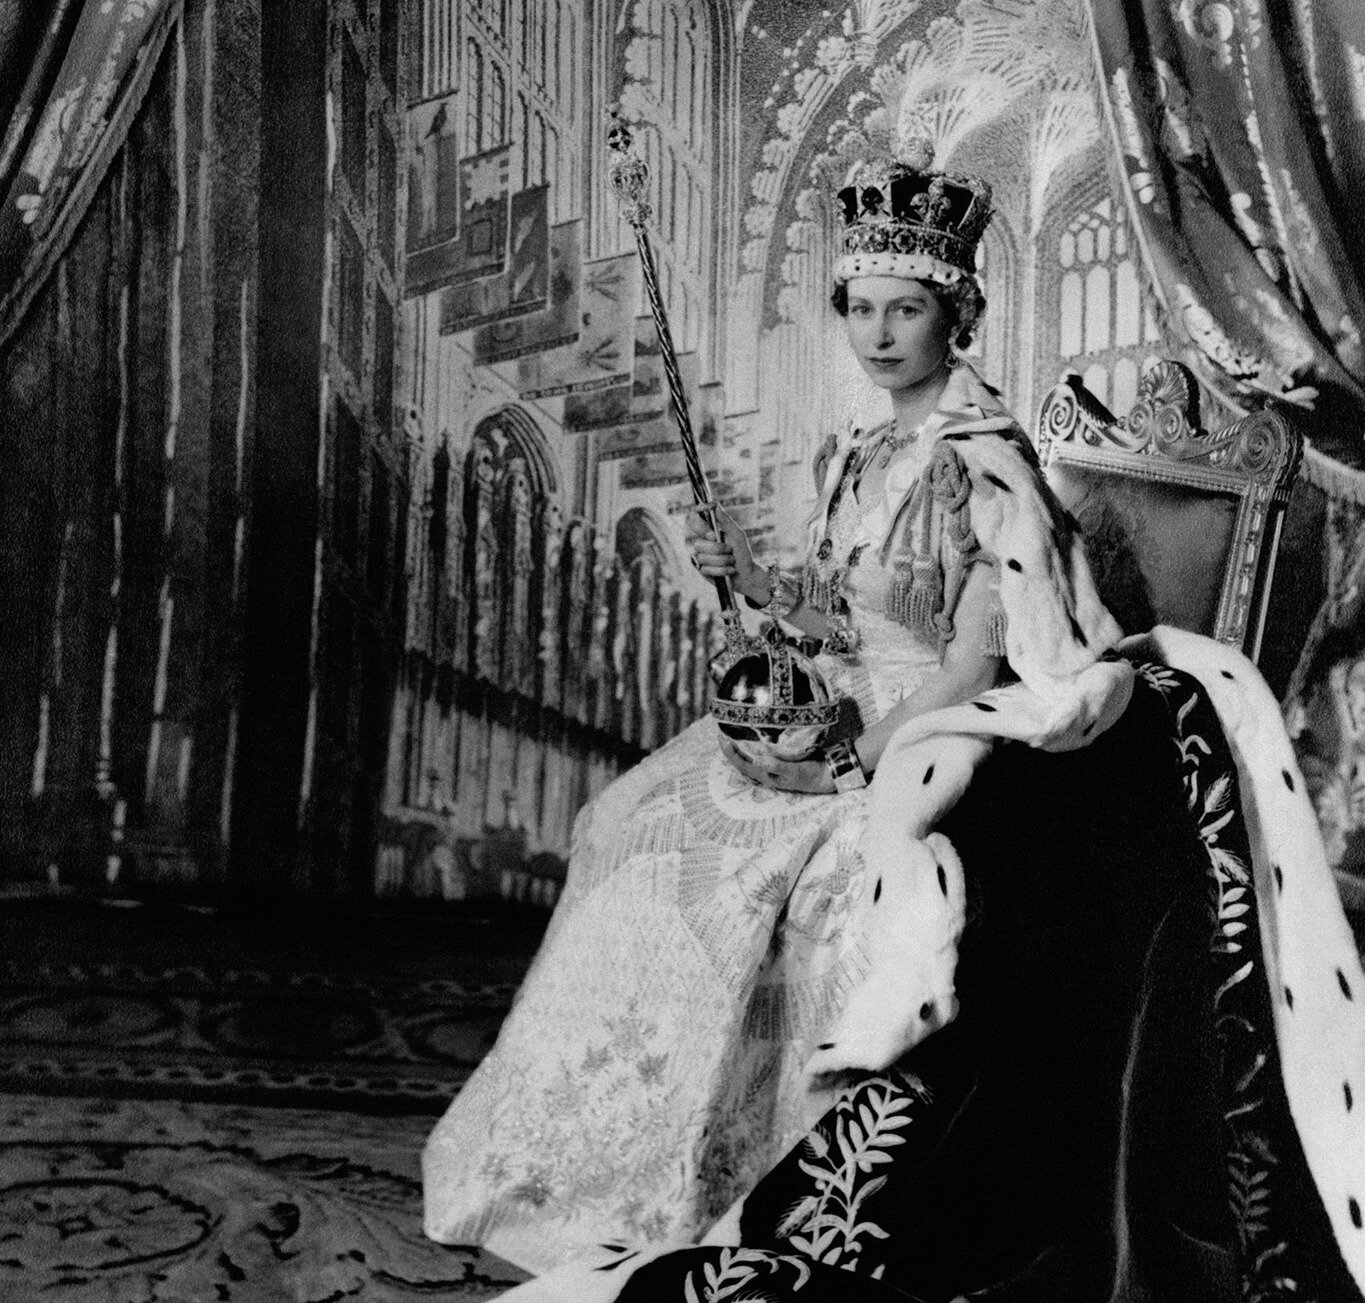 The queen s throne collection. Коронация Елизаветы 2. Коронация королевы Елизаветы 1953.